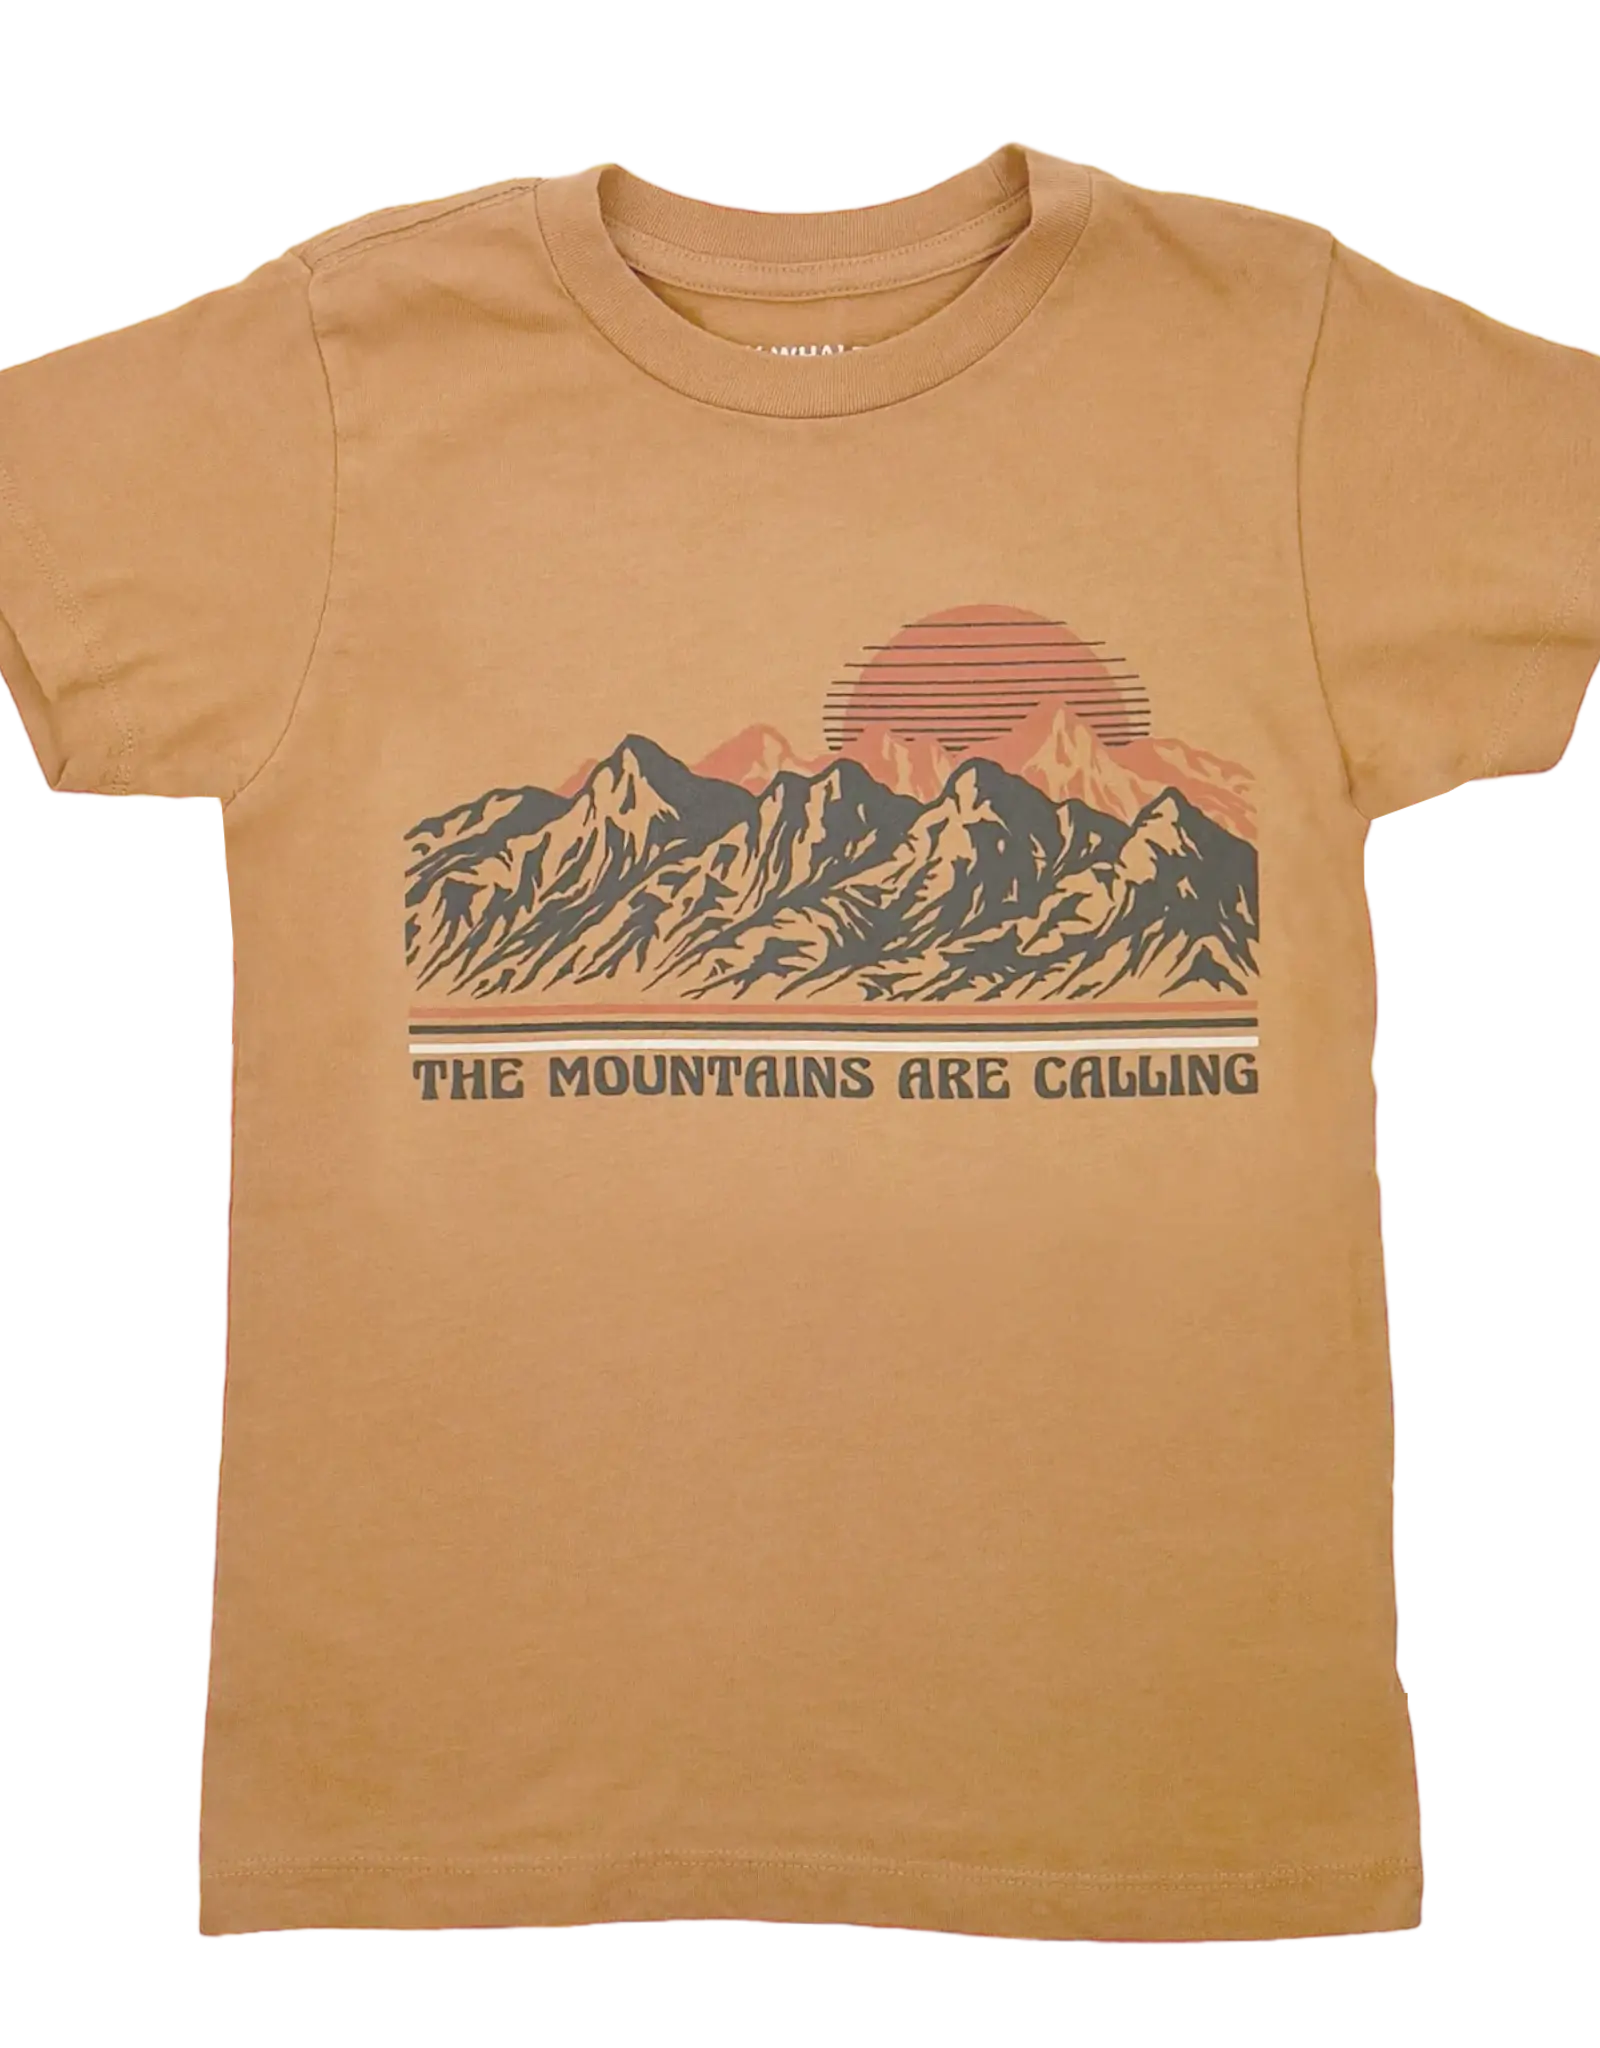 Tiny Whales 12-14YO: T Shirt - Mountains Are Calling